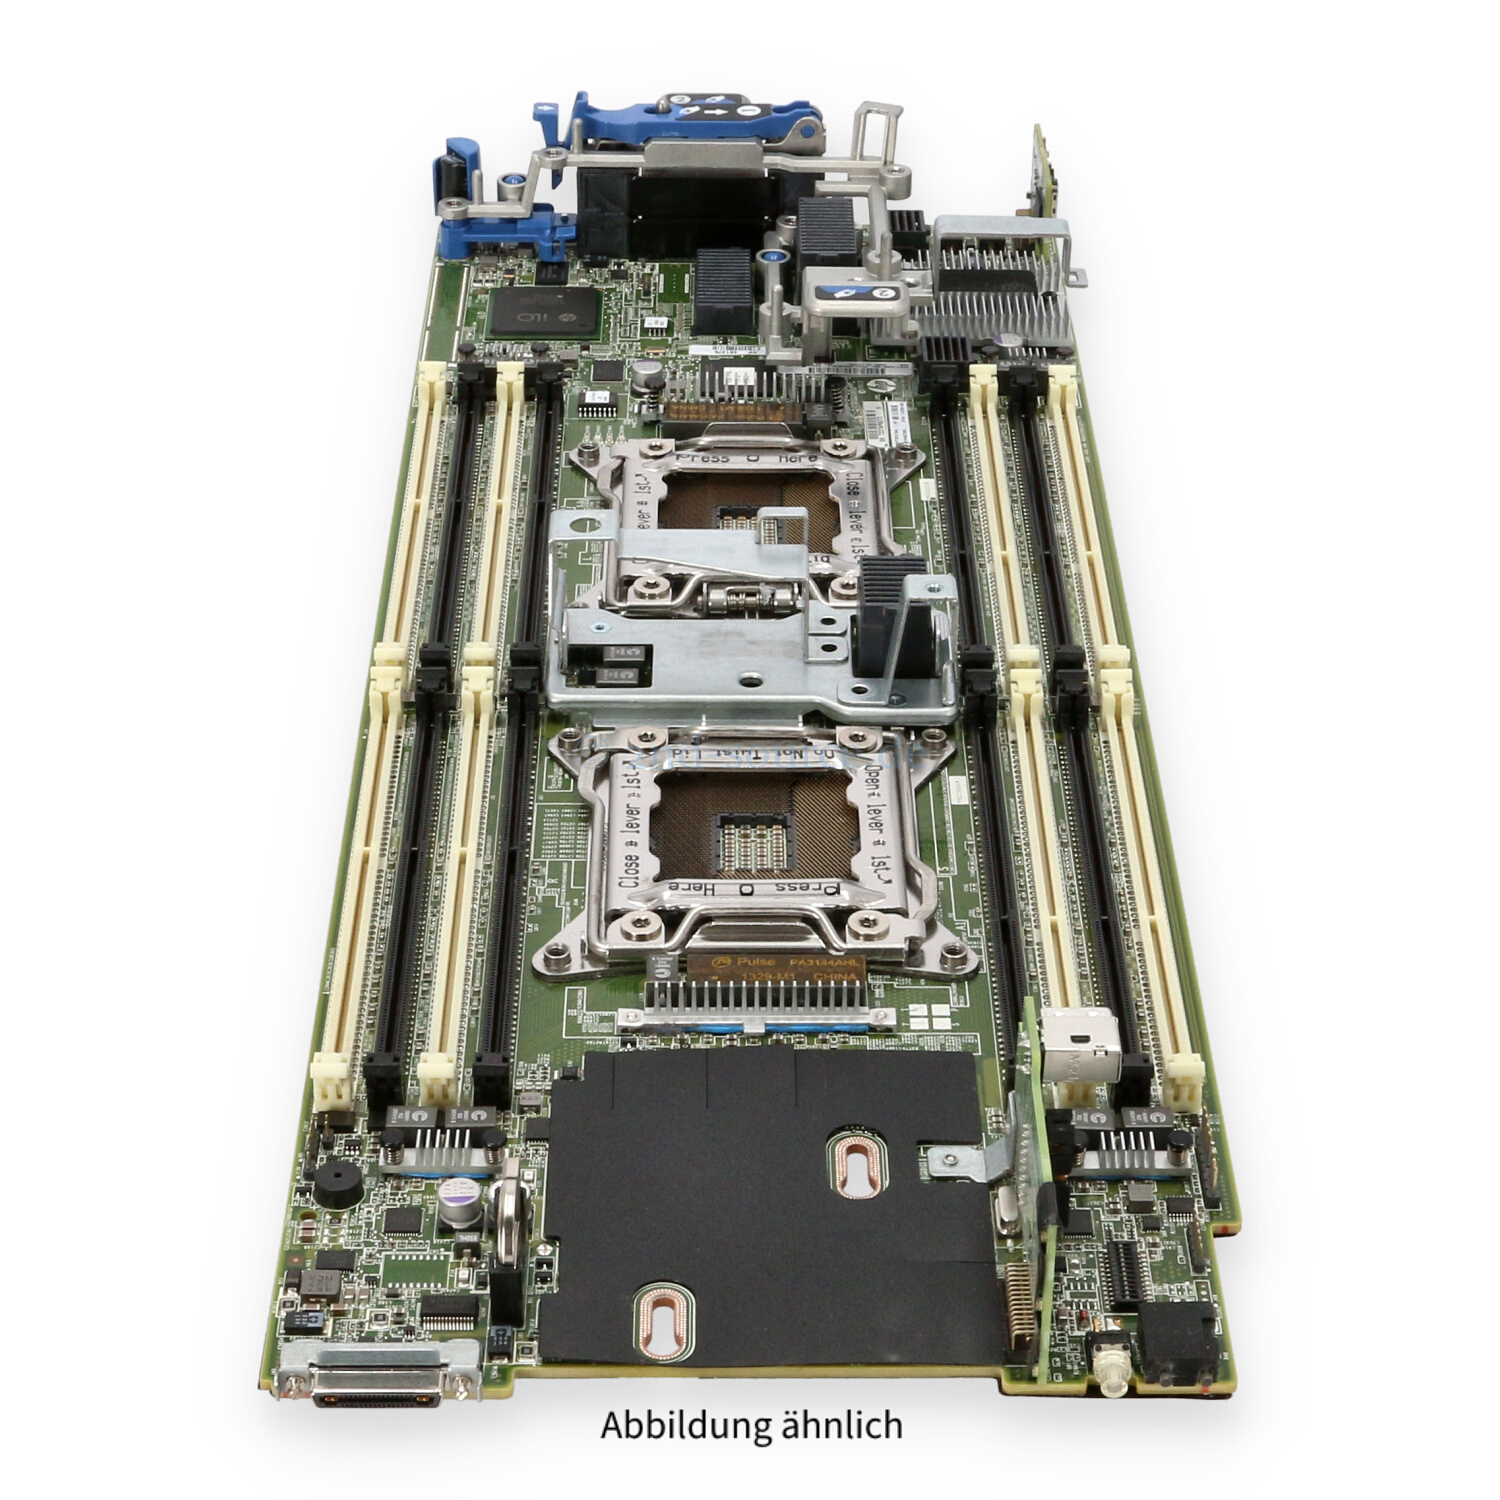 HPE Systemboard BL460c G8 716550-001